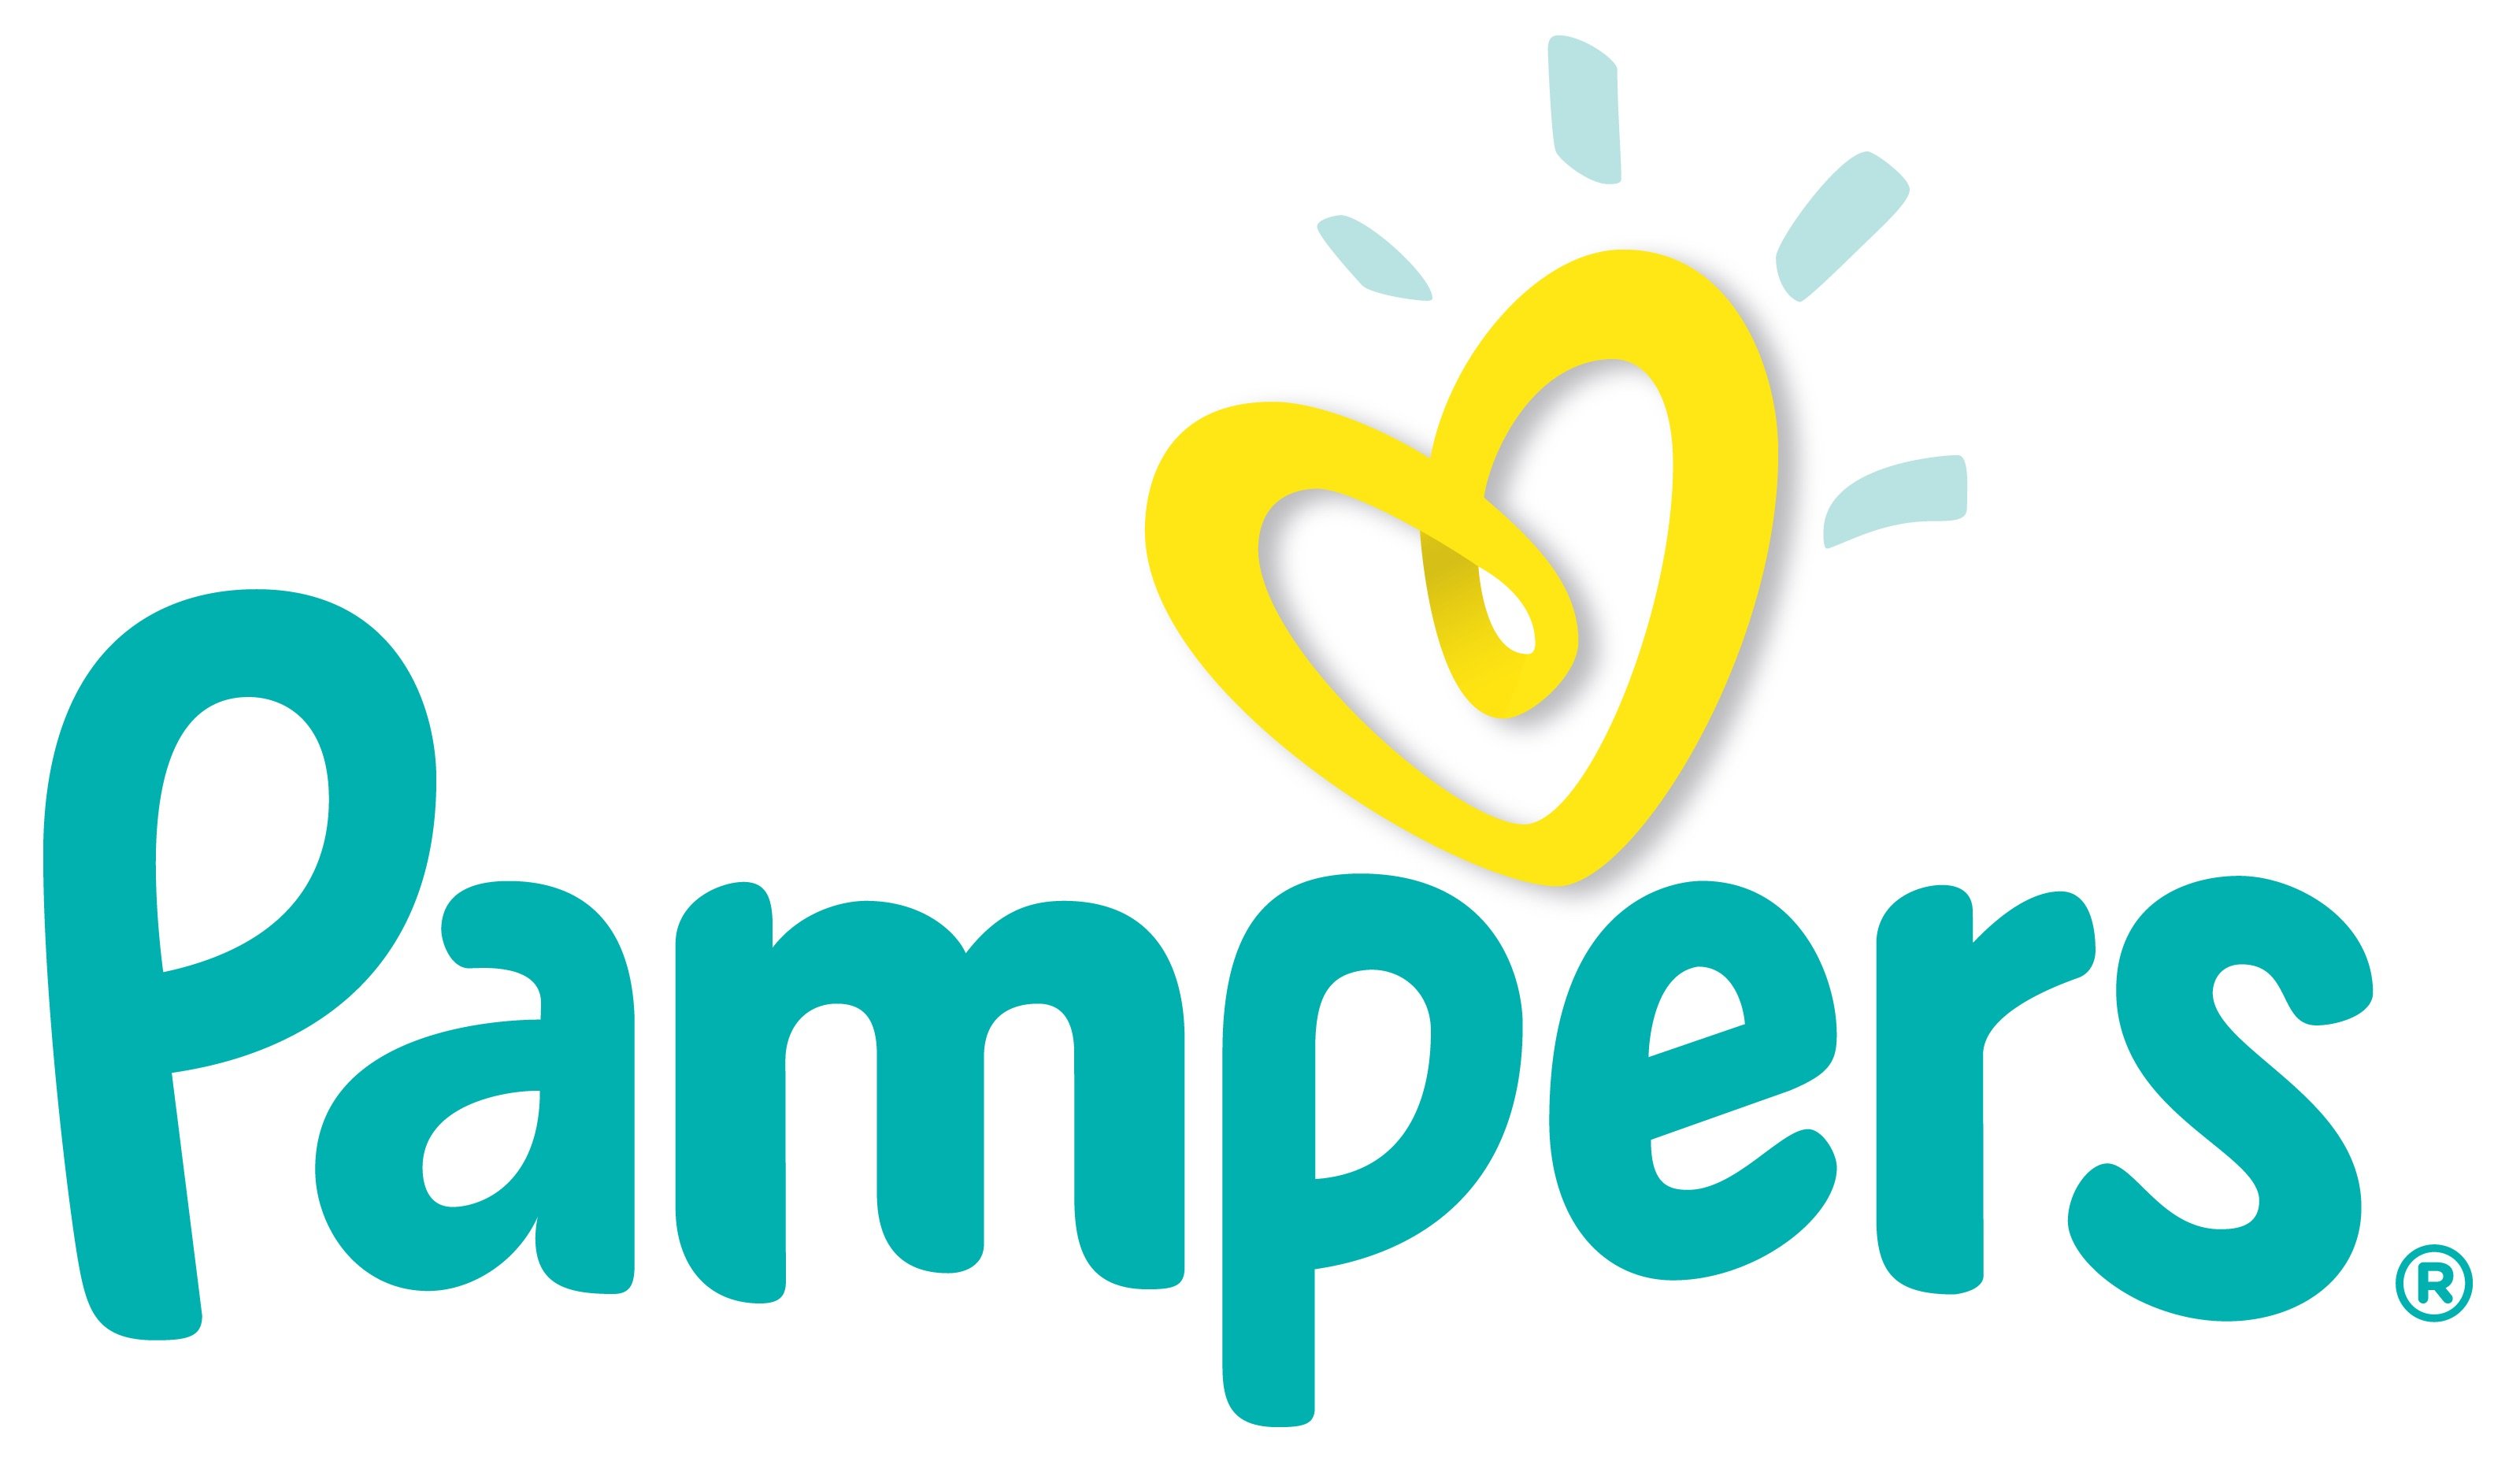 “Pampers"